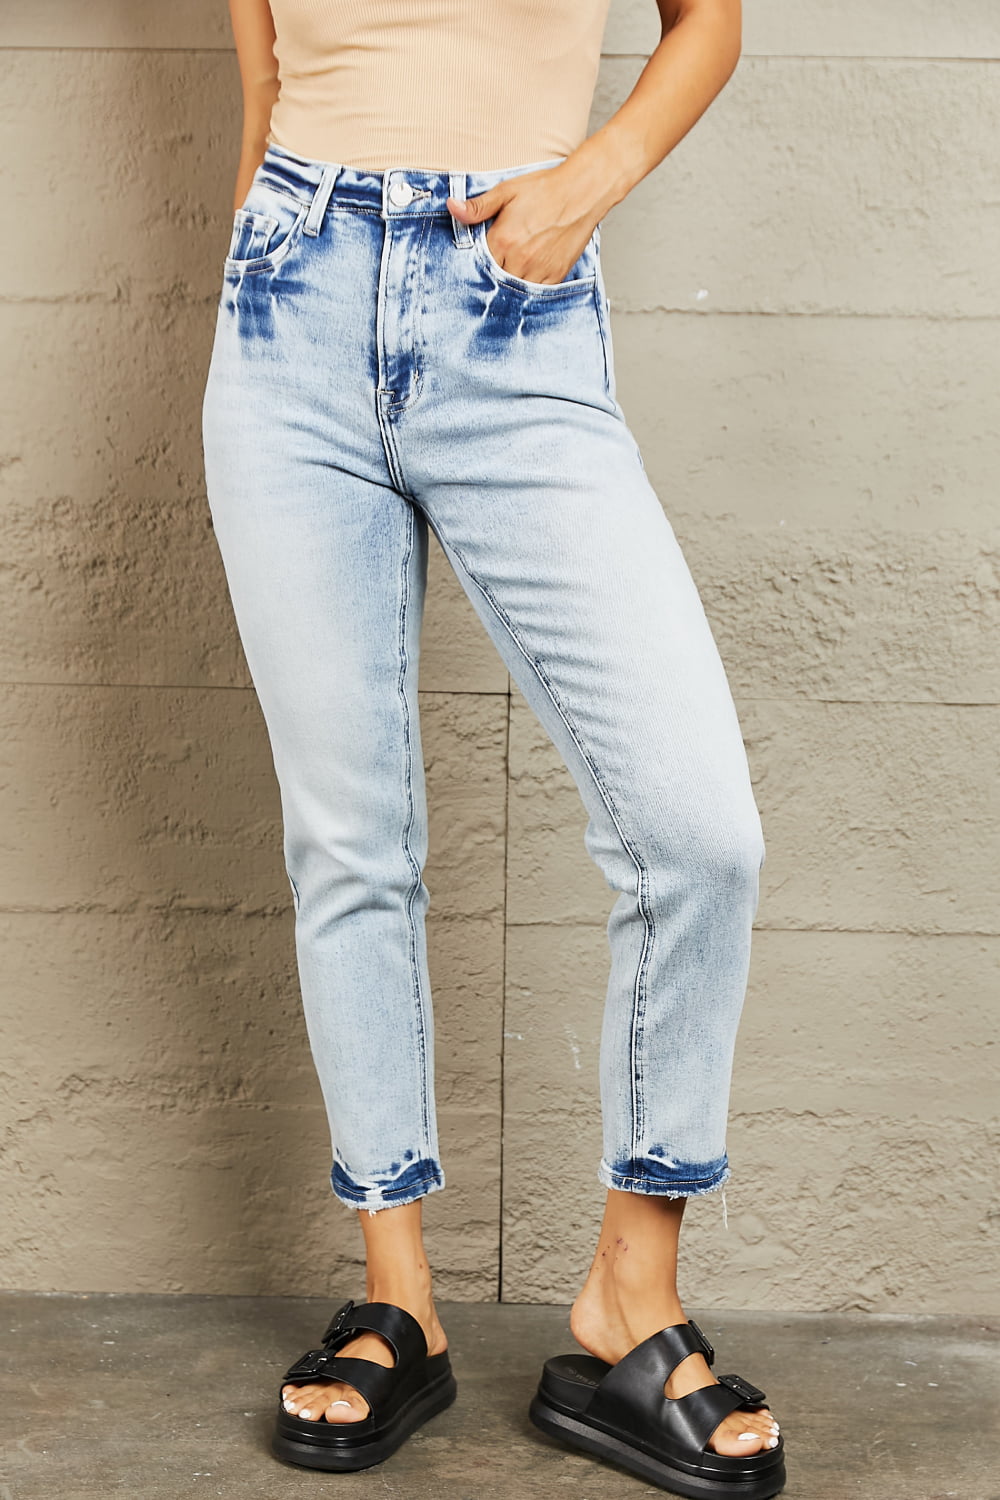 BAYEAS High Waisted Accent Skinny Jeans - Alonna's Legging Land